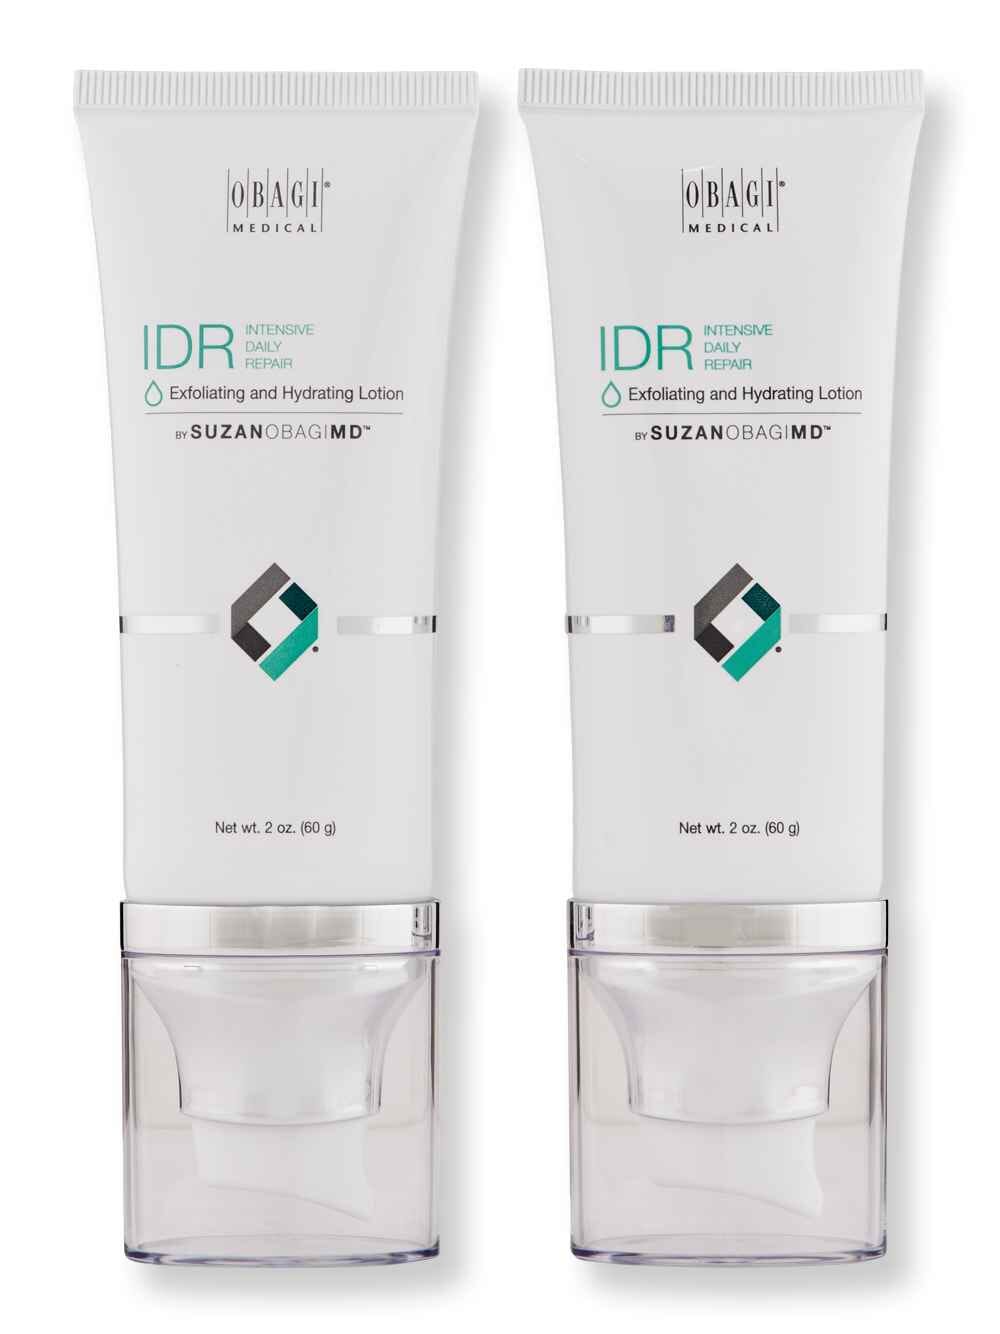 Obagi Obagi SuzanObagiMD Intensive Daily Repair Exfoliating and Hydrating Lotion 2 Ct 2 oz Face Moisturizers 